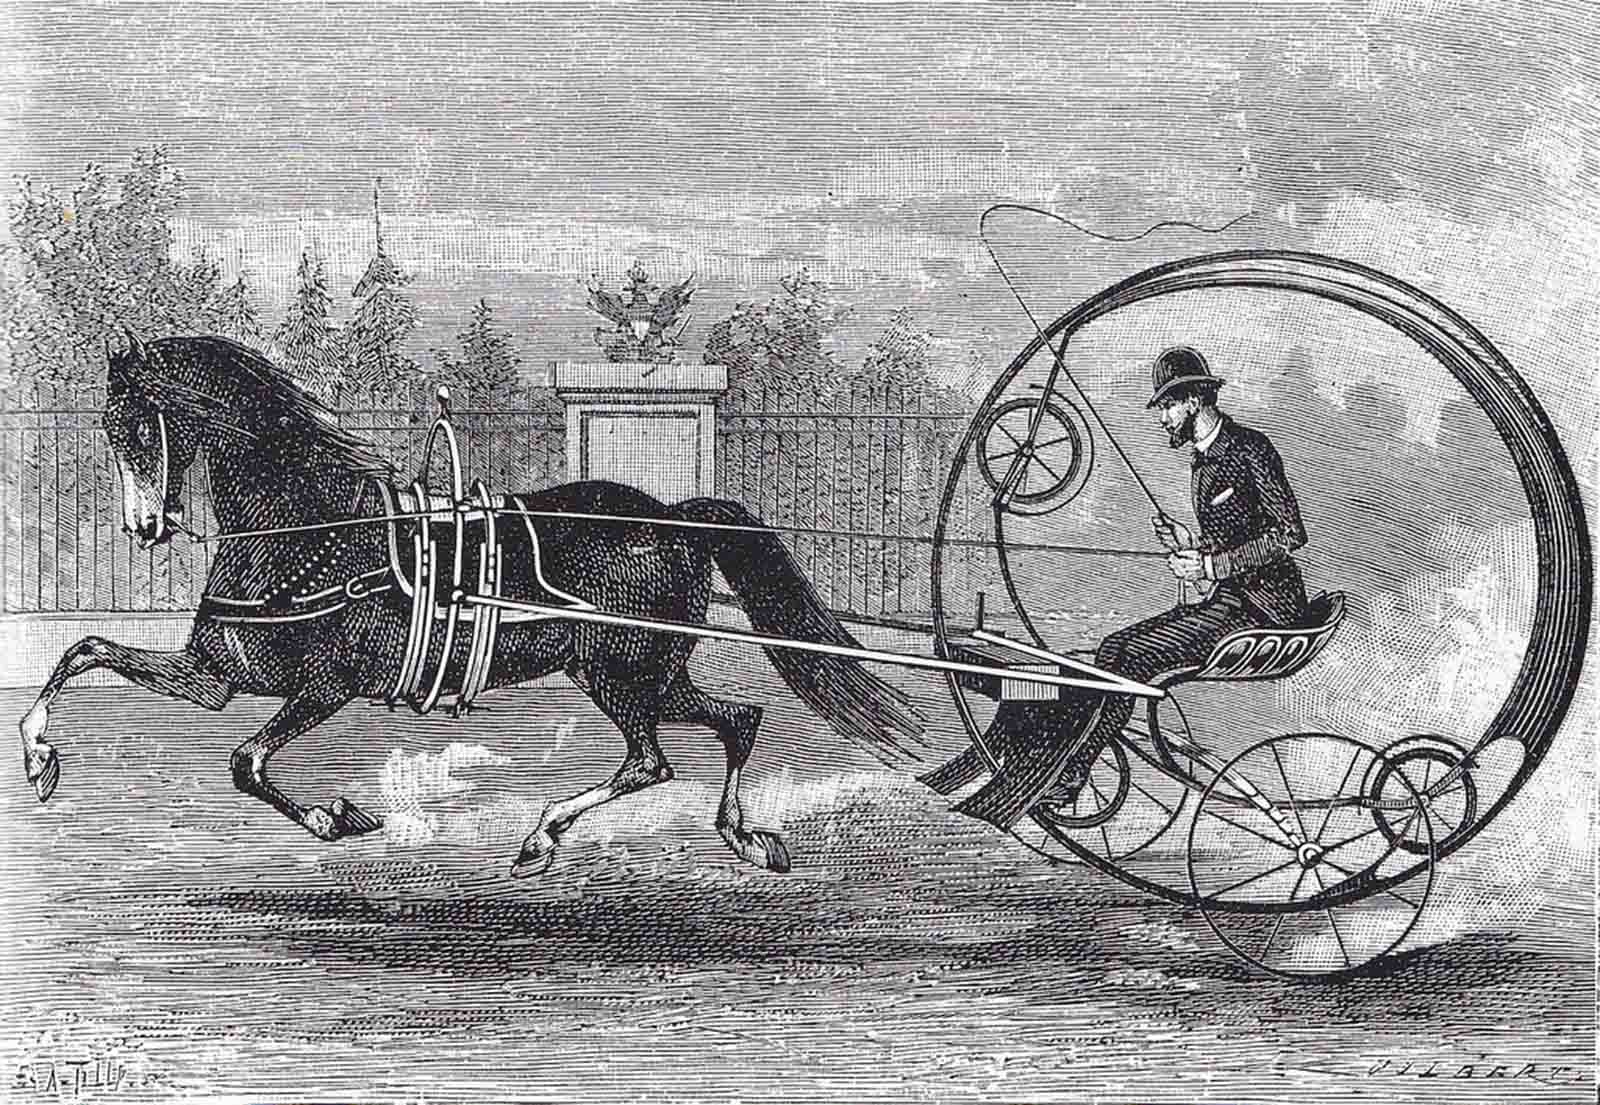 A one-horse monowheel design. Date unknown, but probably 1870-1890.